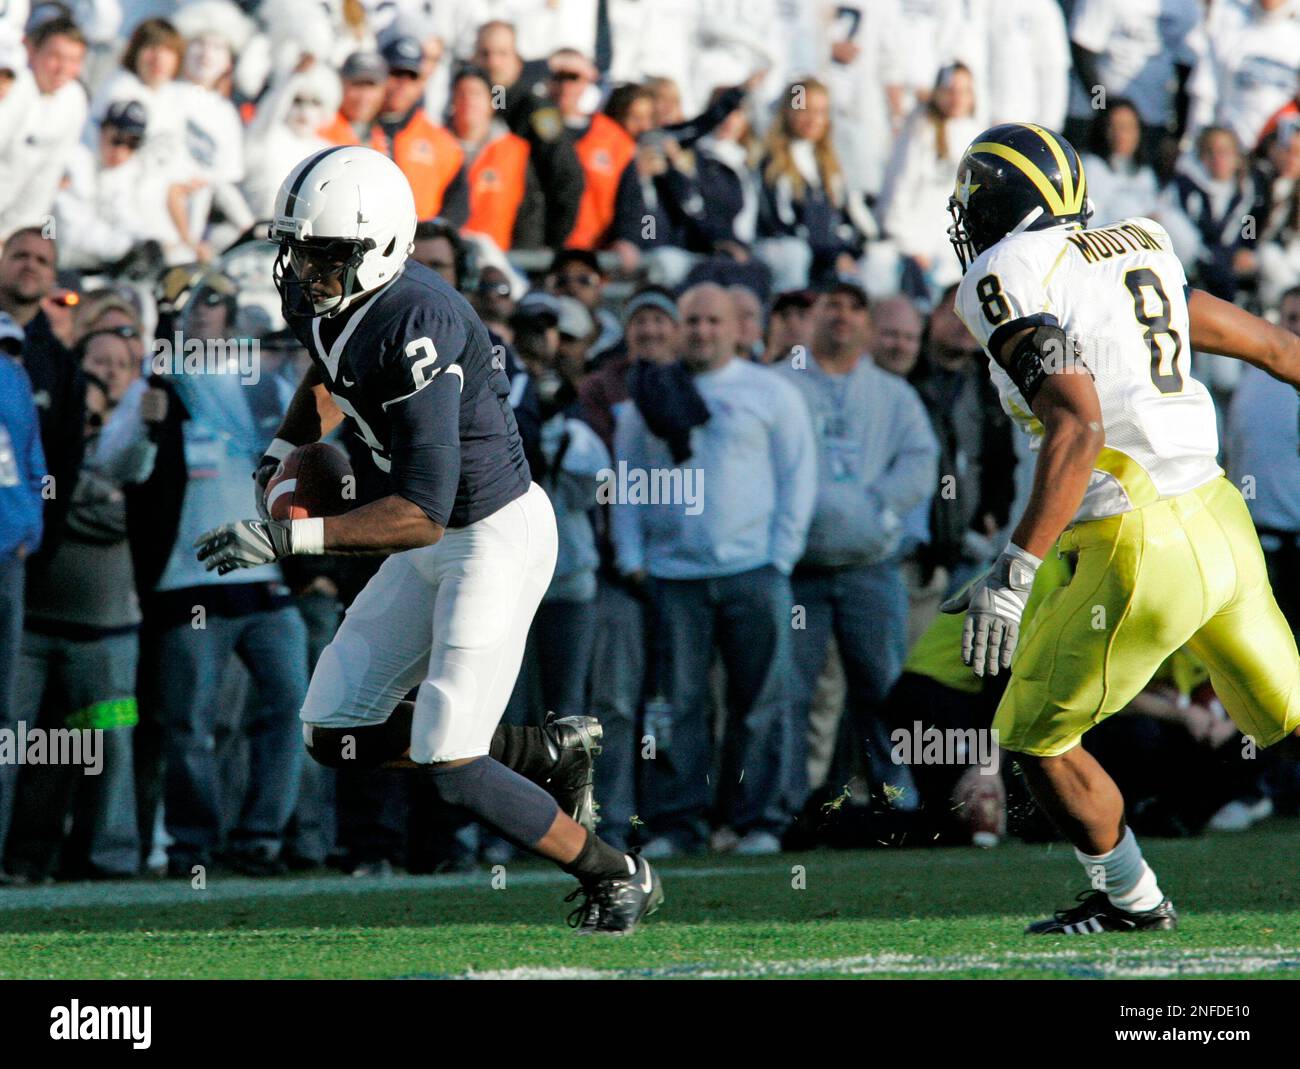 Penn State receiver Derrick Williams (2) against Michigan during an NCAA  college football game in State College, Pa., Saturday, Sept. 20, 2008. (AP  Photo/Gene J. Puskar Stock Photo - Alamy